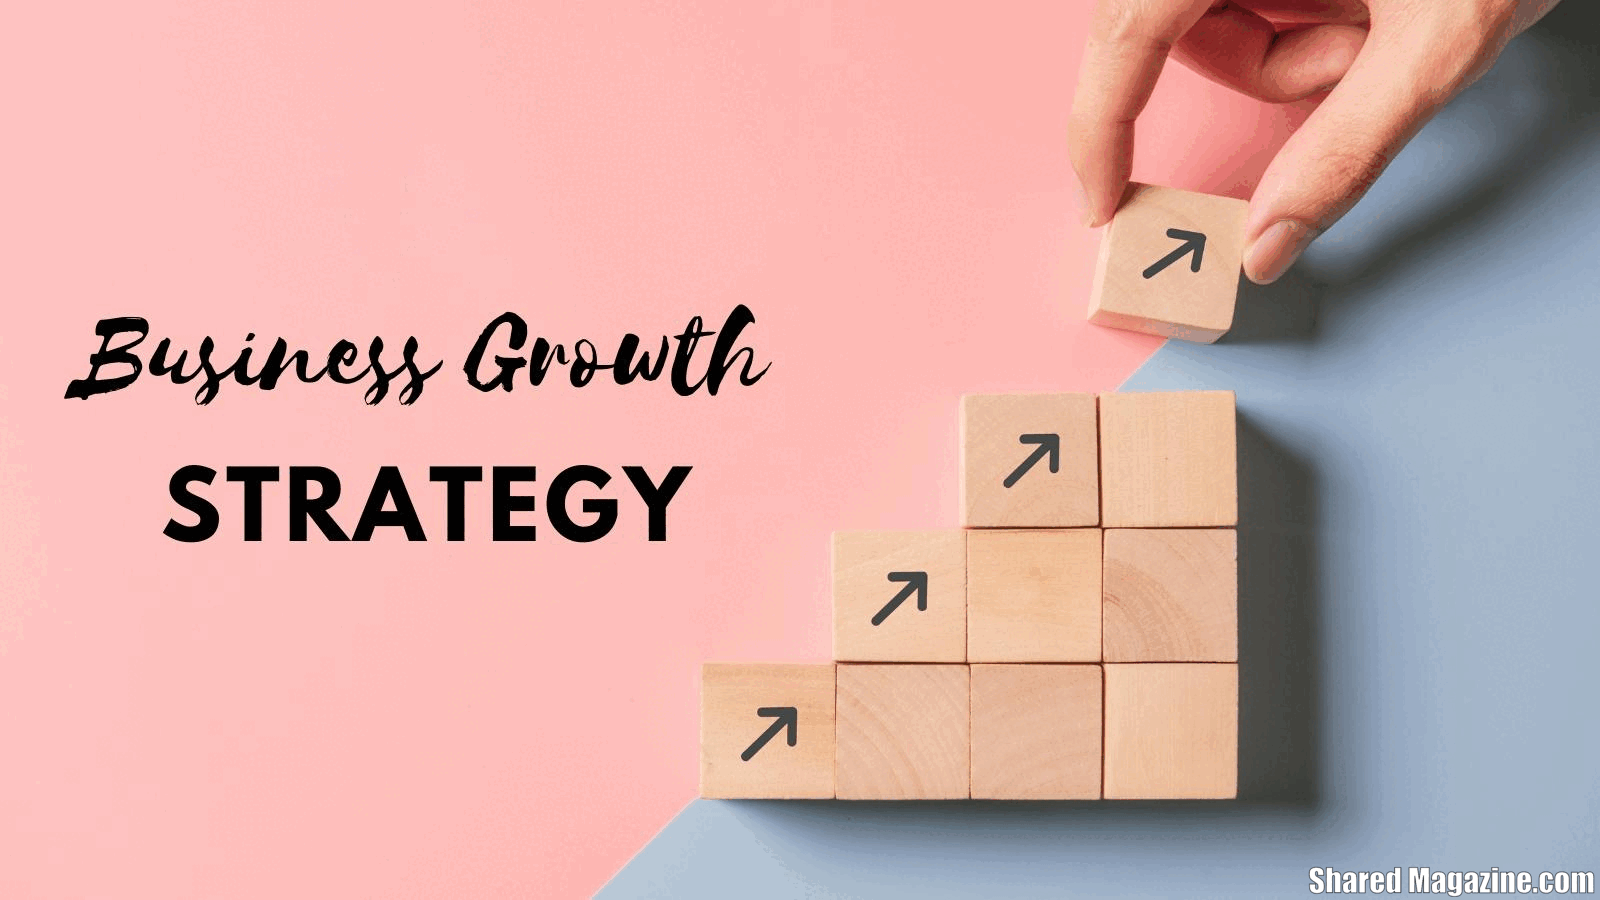 5 Strategies for Business Growth